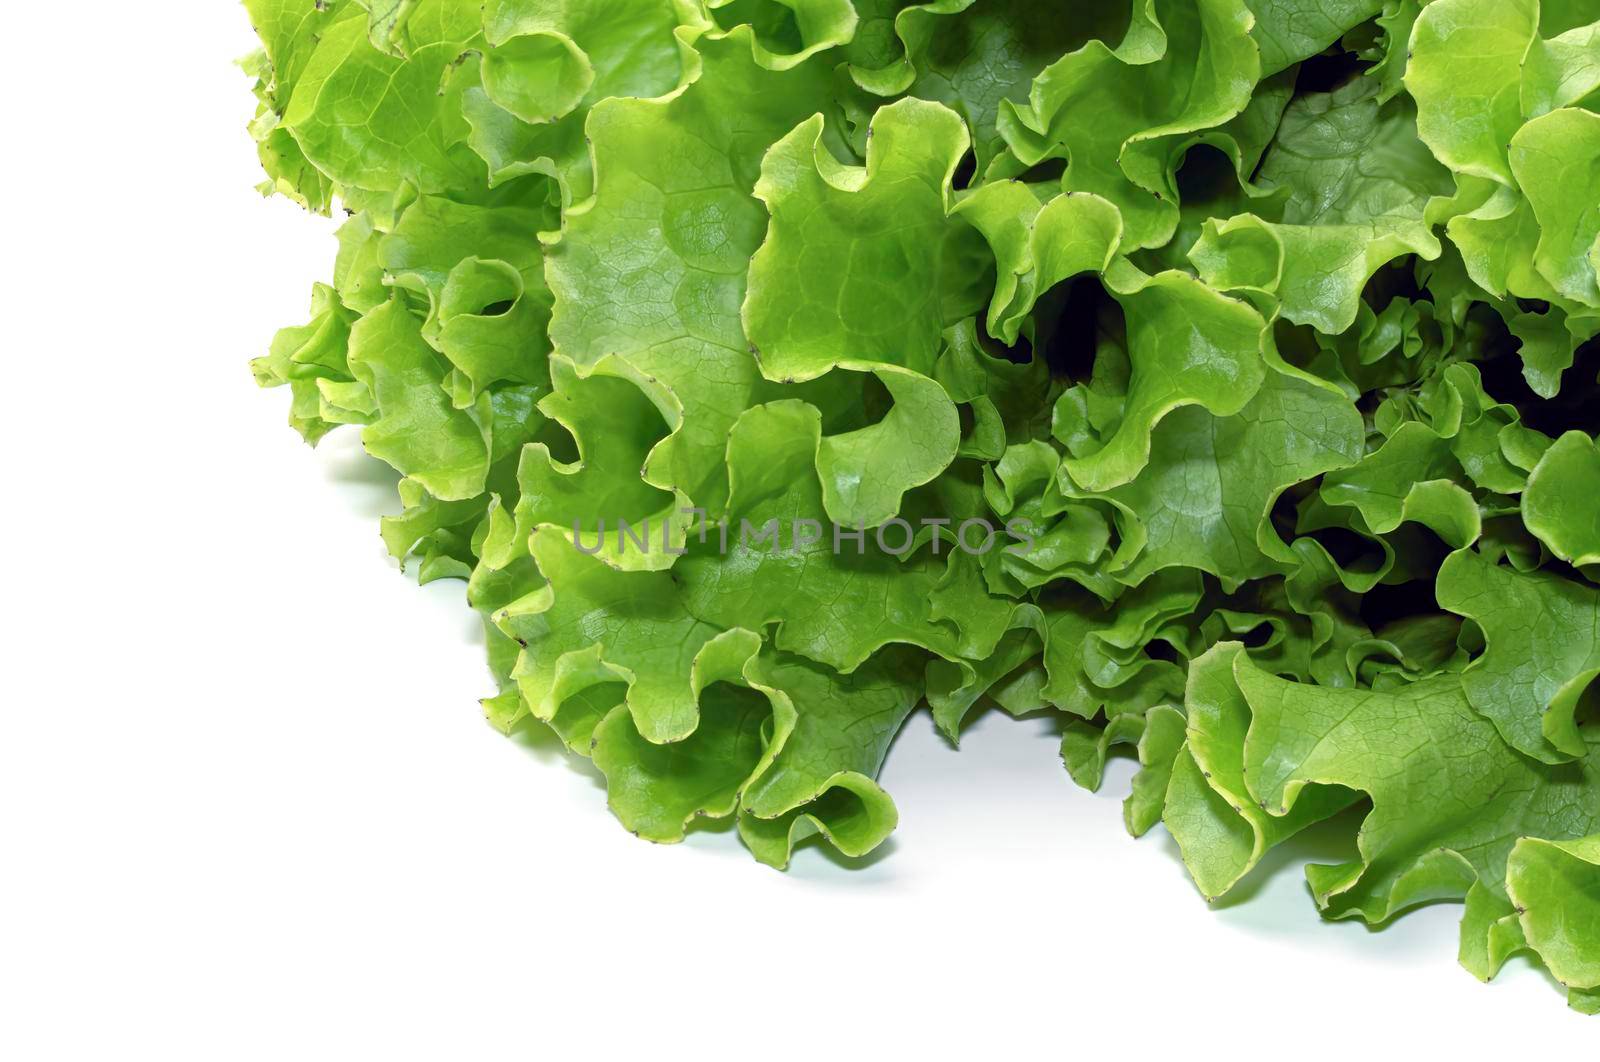 lettuce leaf on a white background close-up. isolate by roman112007